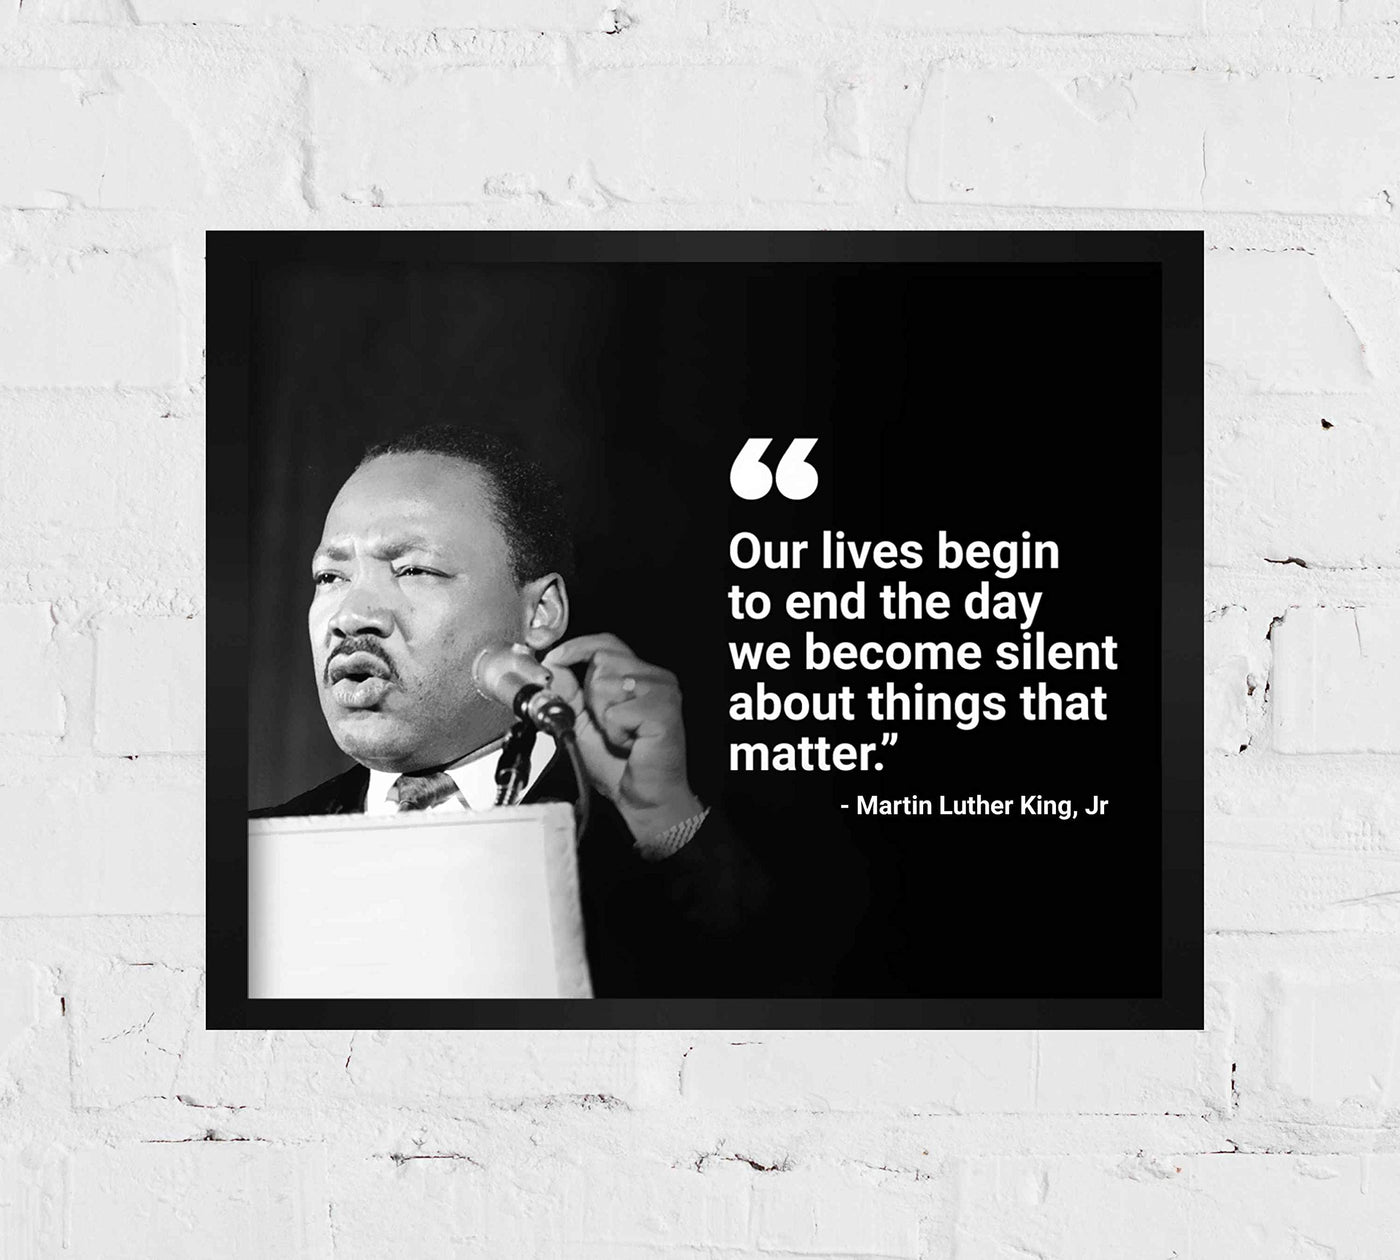 Martin Luther King Jr. Quotes-"Our Lives Begin to End the Day We Become Silent"-10 x 8" Silhouette Wall Art Print-Ready to Frame. Inspirational Home-Office-School D?cor. Perfect Gift for MLK Fans.